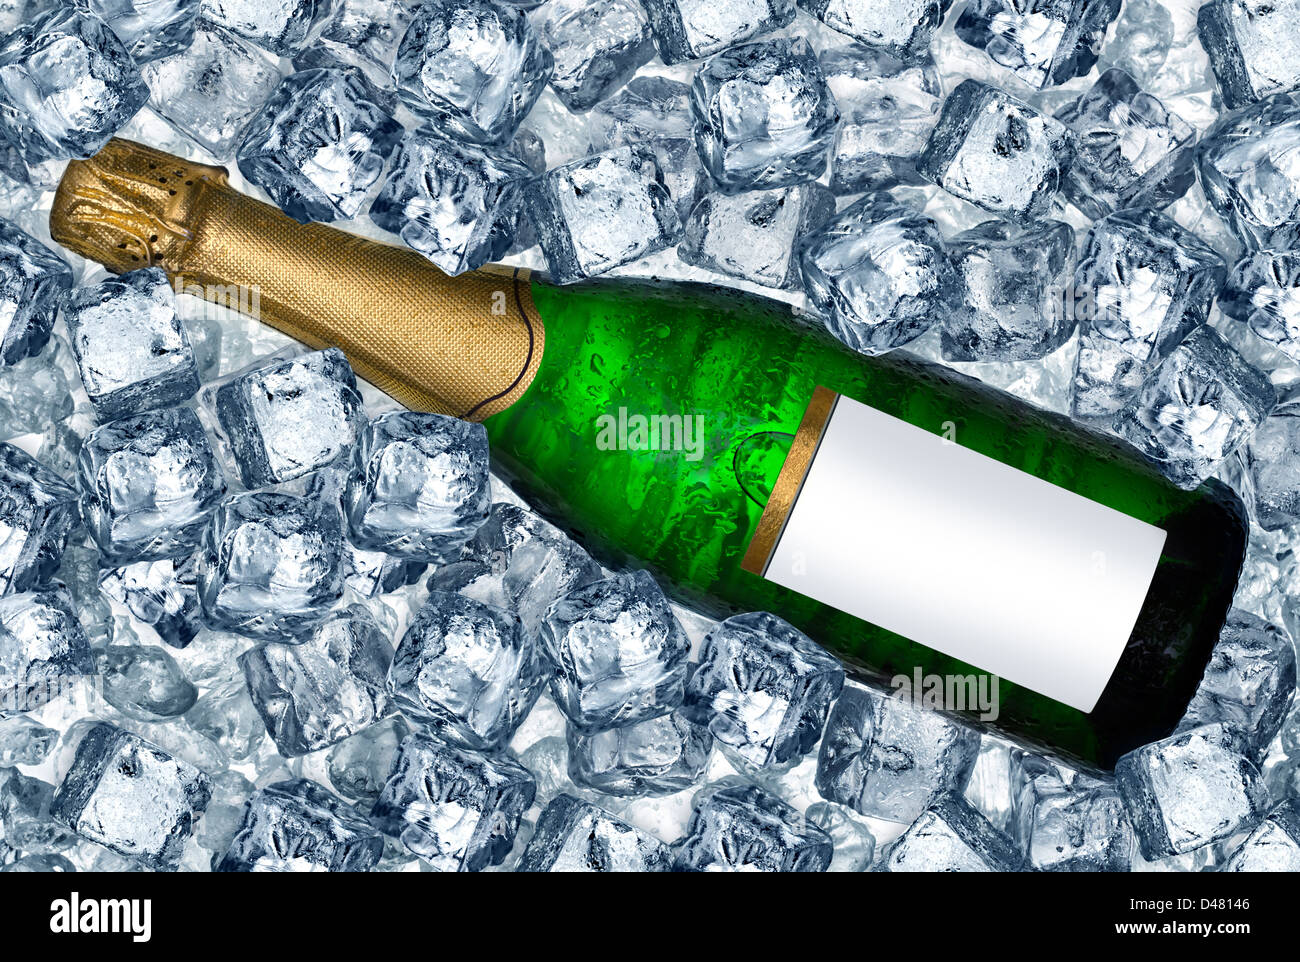 bottle of champagne on ice cubes Stock Photo